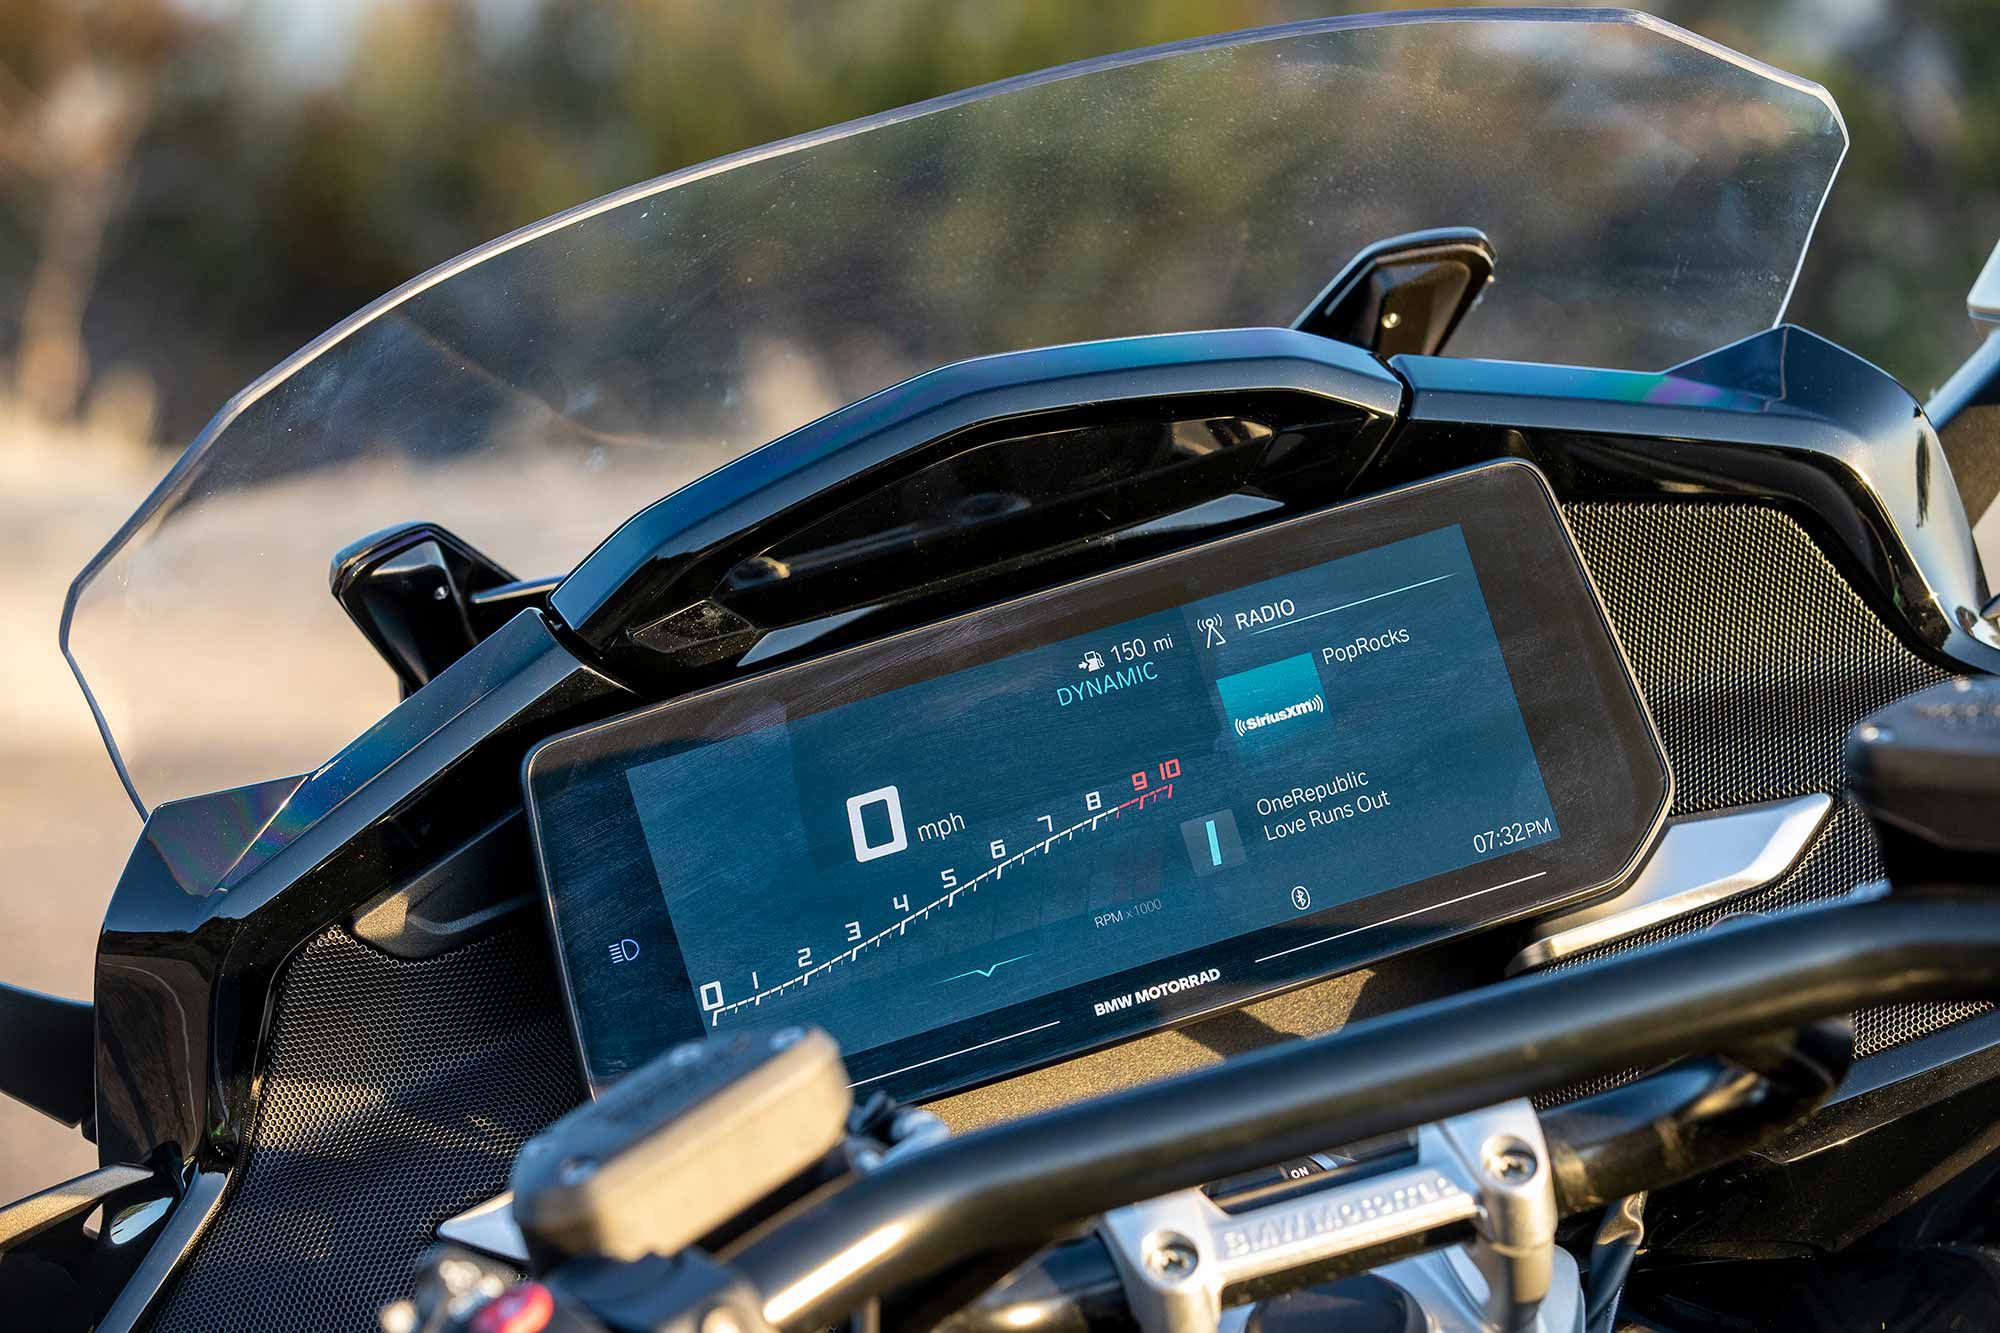 The K 1600 platform employs a giant 10.25-inch color TFT screen. The display is sharp and easy to read day or night. We appreciate the consistent BMW font and menu navigation.